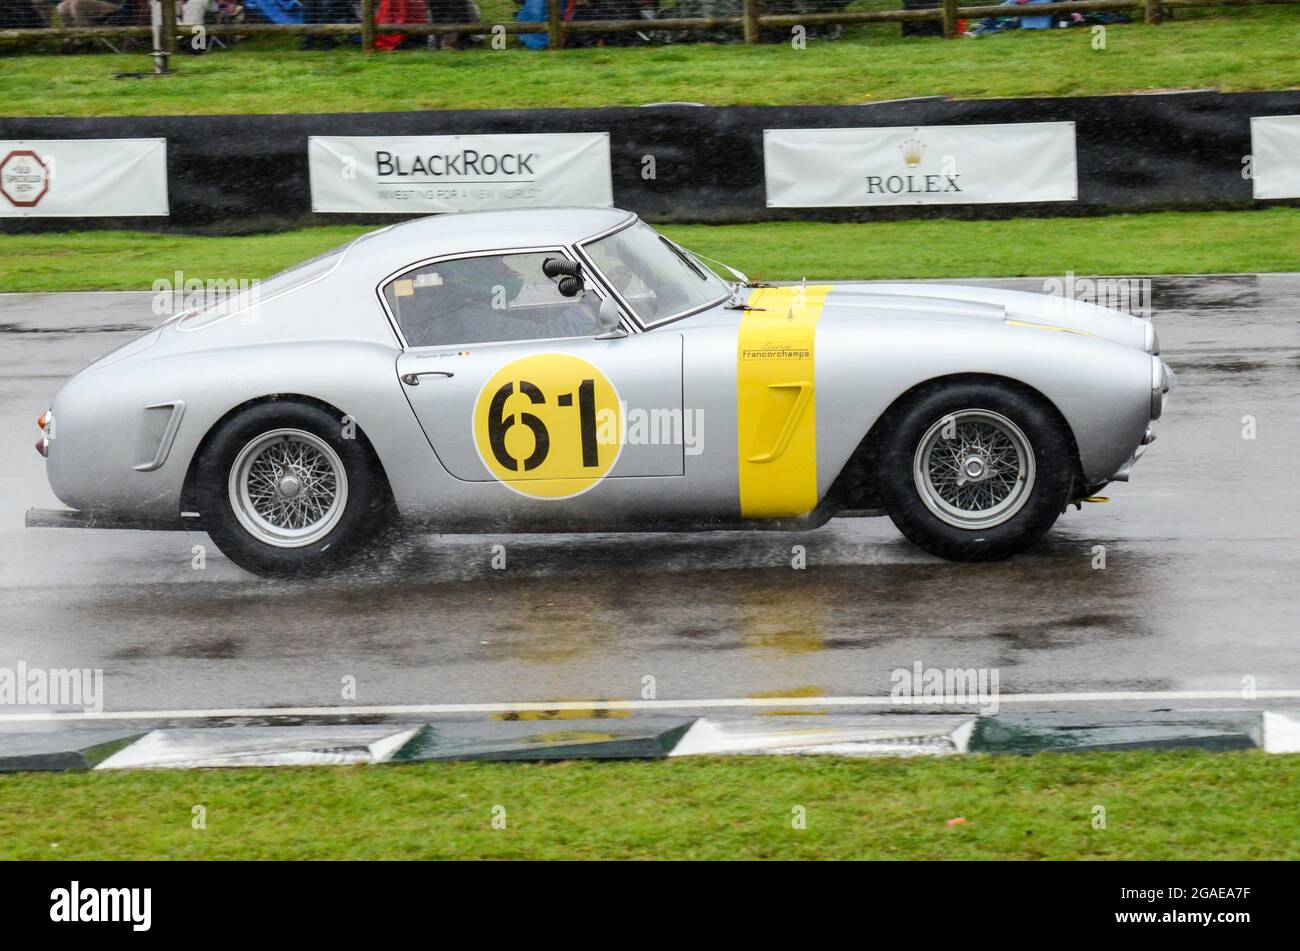 Ferrari 250 GT SWB Berlinetta racing car competing in the RAC Tourist Trophy Celebration endurance race at the Goodwood Revival 2013 in wet conditions Stock Photo